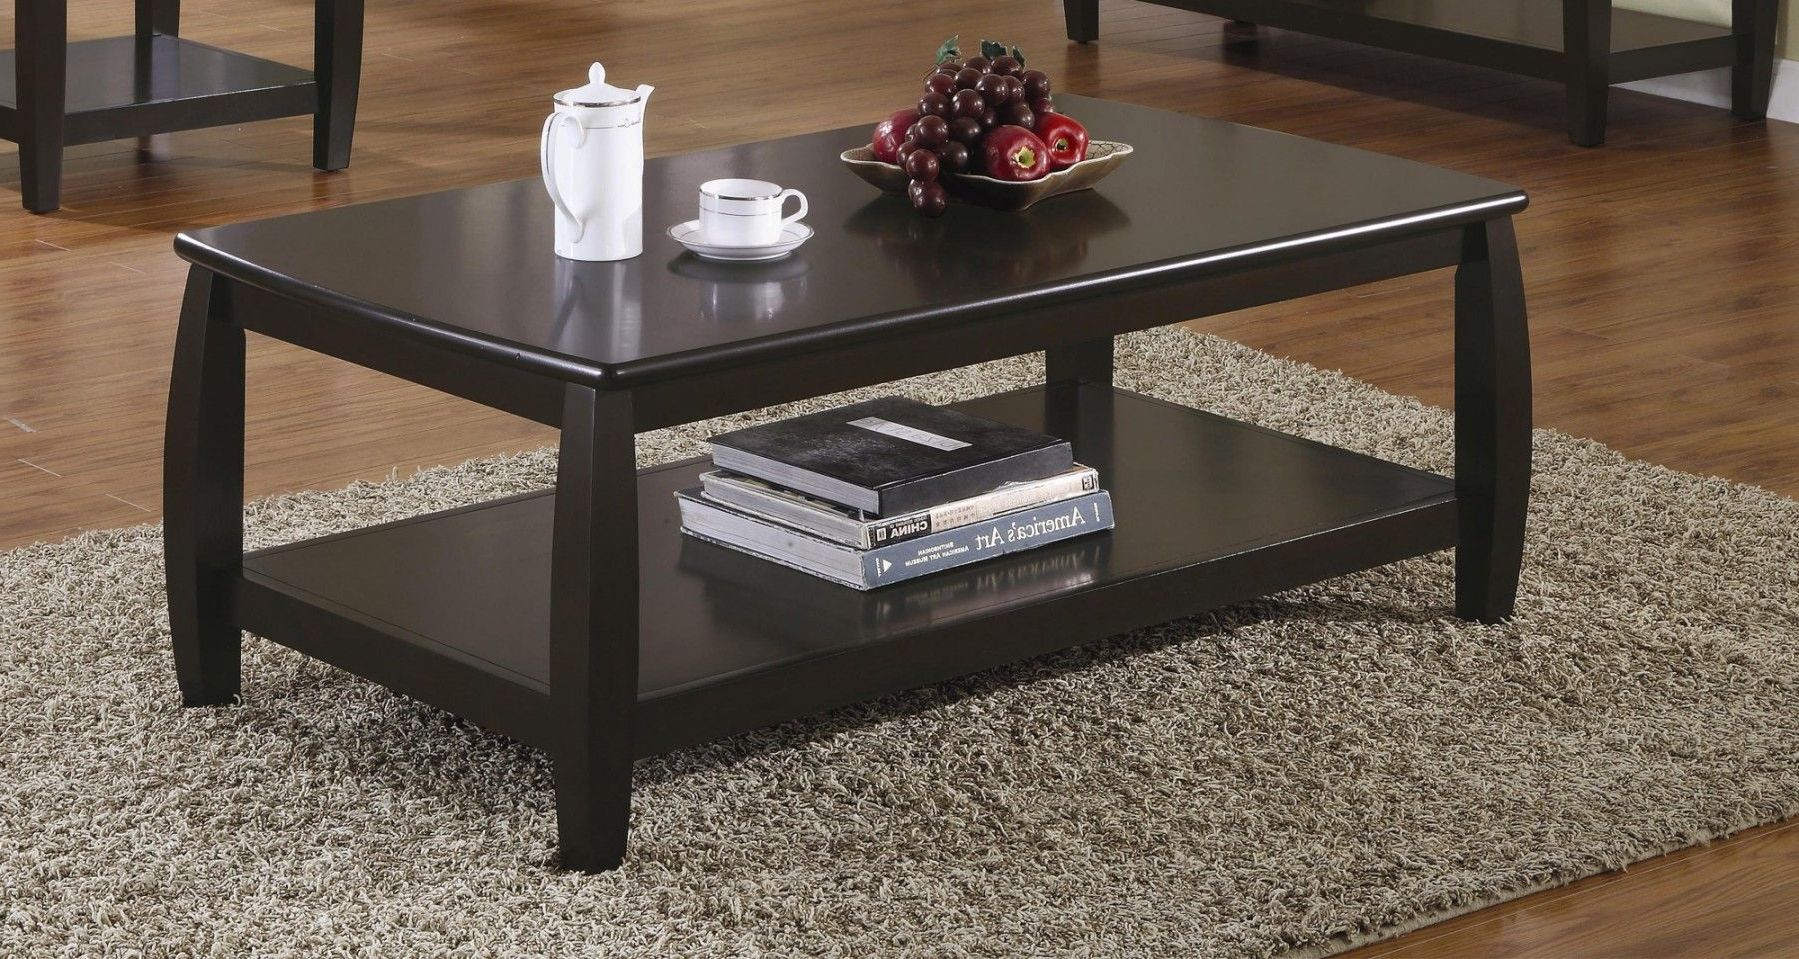 Coaster Wood Top Espresso Coffee Table With 1 Shelf In Best And Newest 1 Shelf Coffee Tables (View 5 of 20)